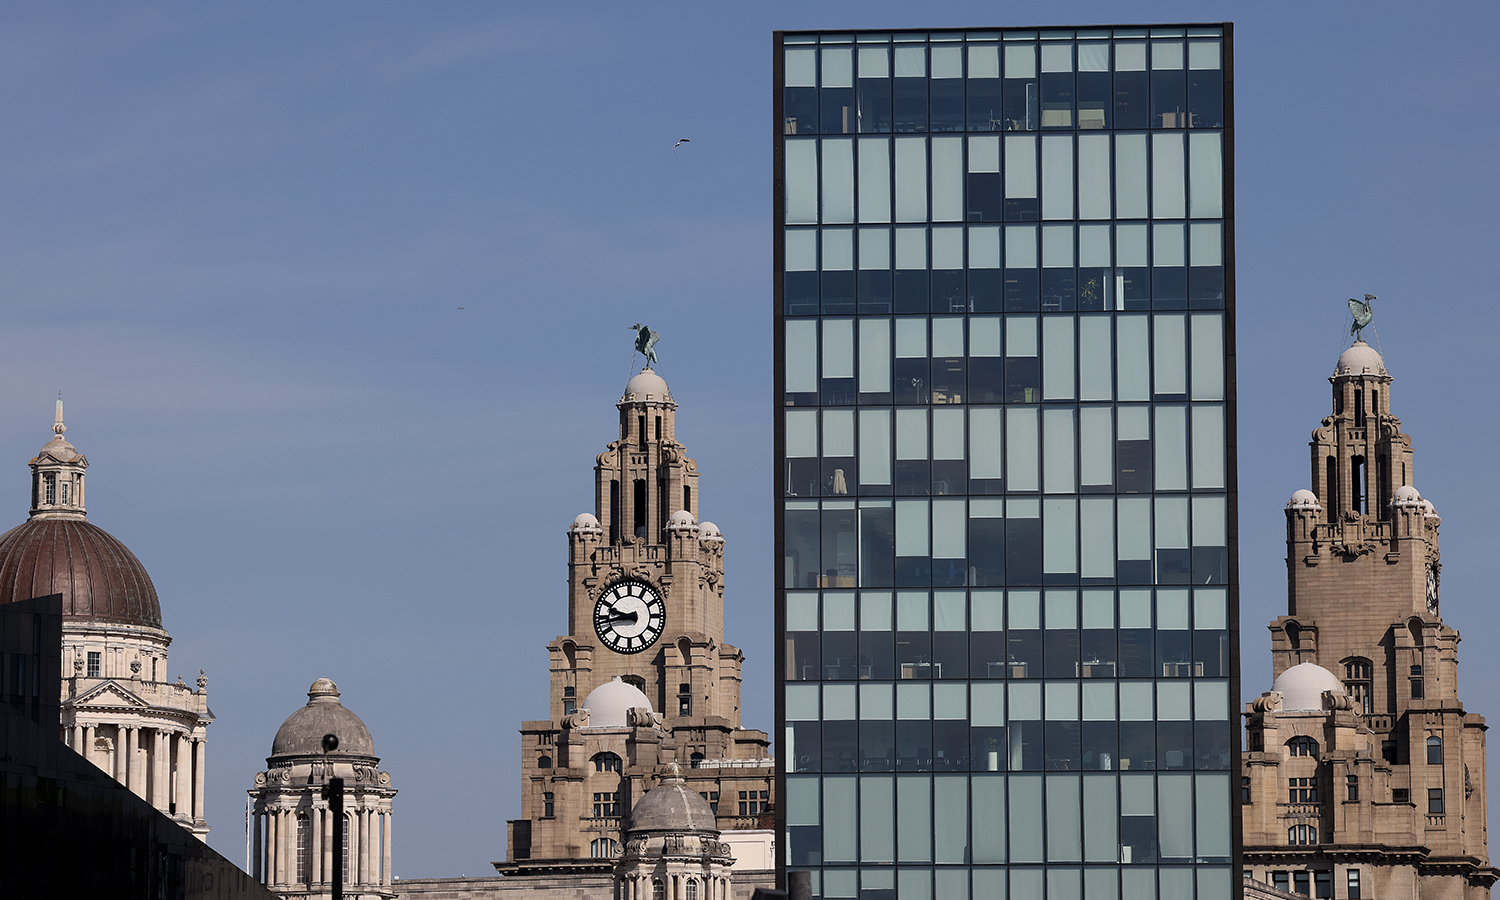 Skyline shot of Liver Buildings. Picture by Gareth Jones.